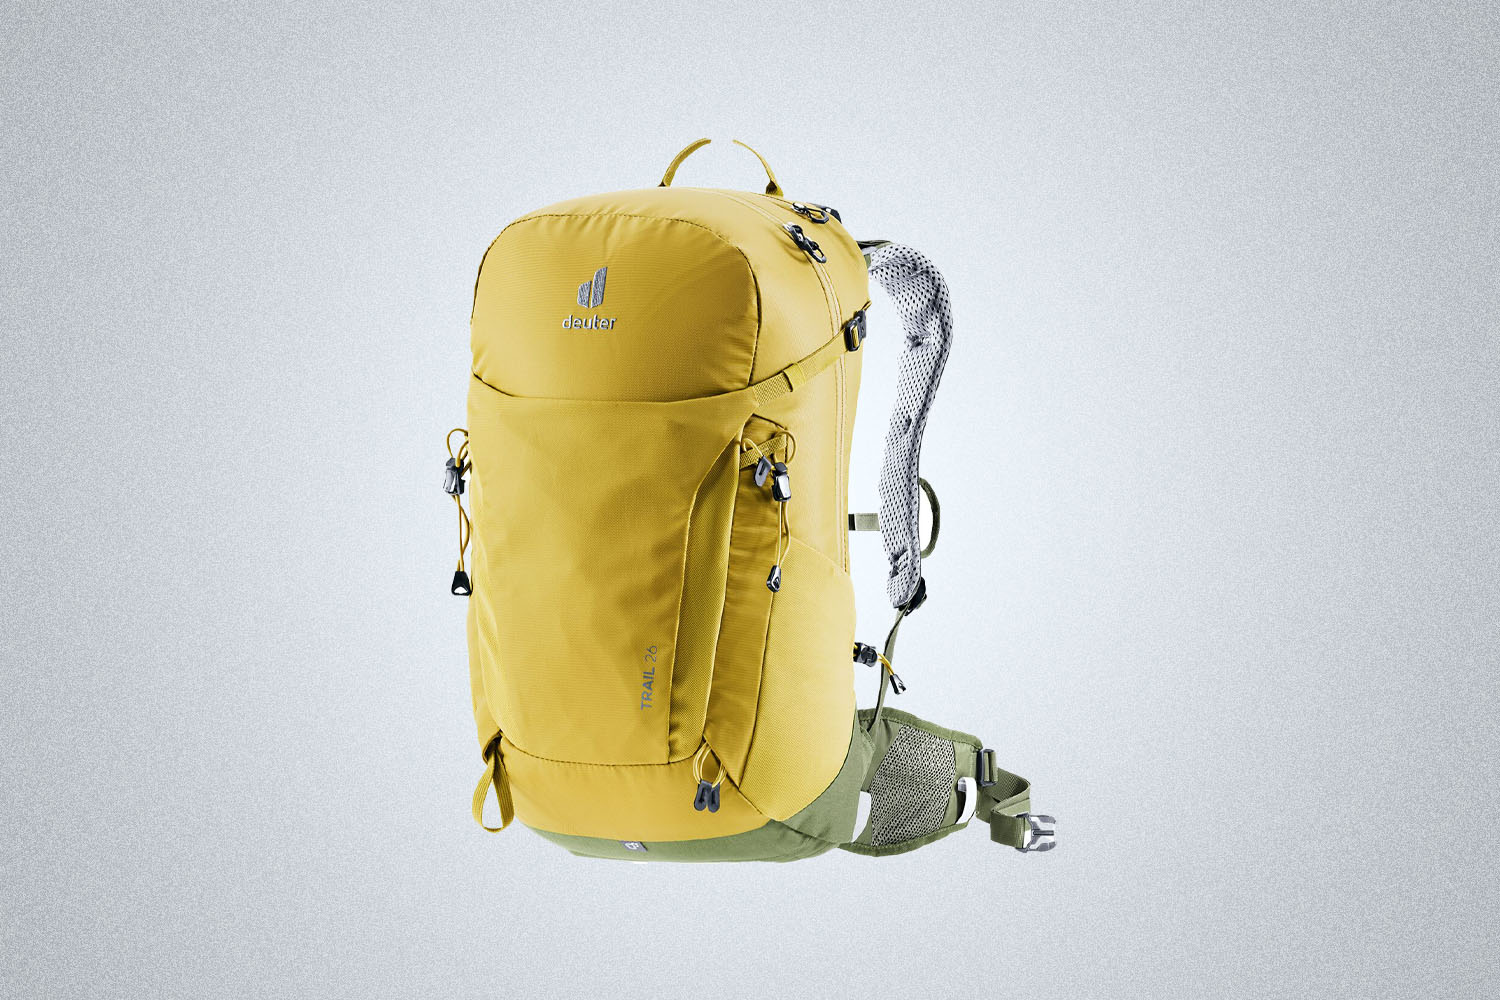 Deuter Trail 26L Backpack in yellow and green